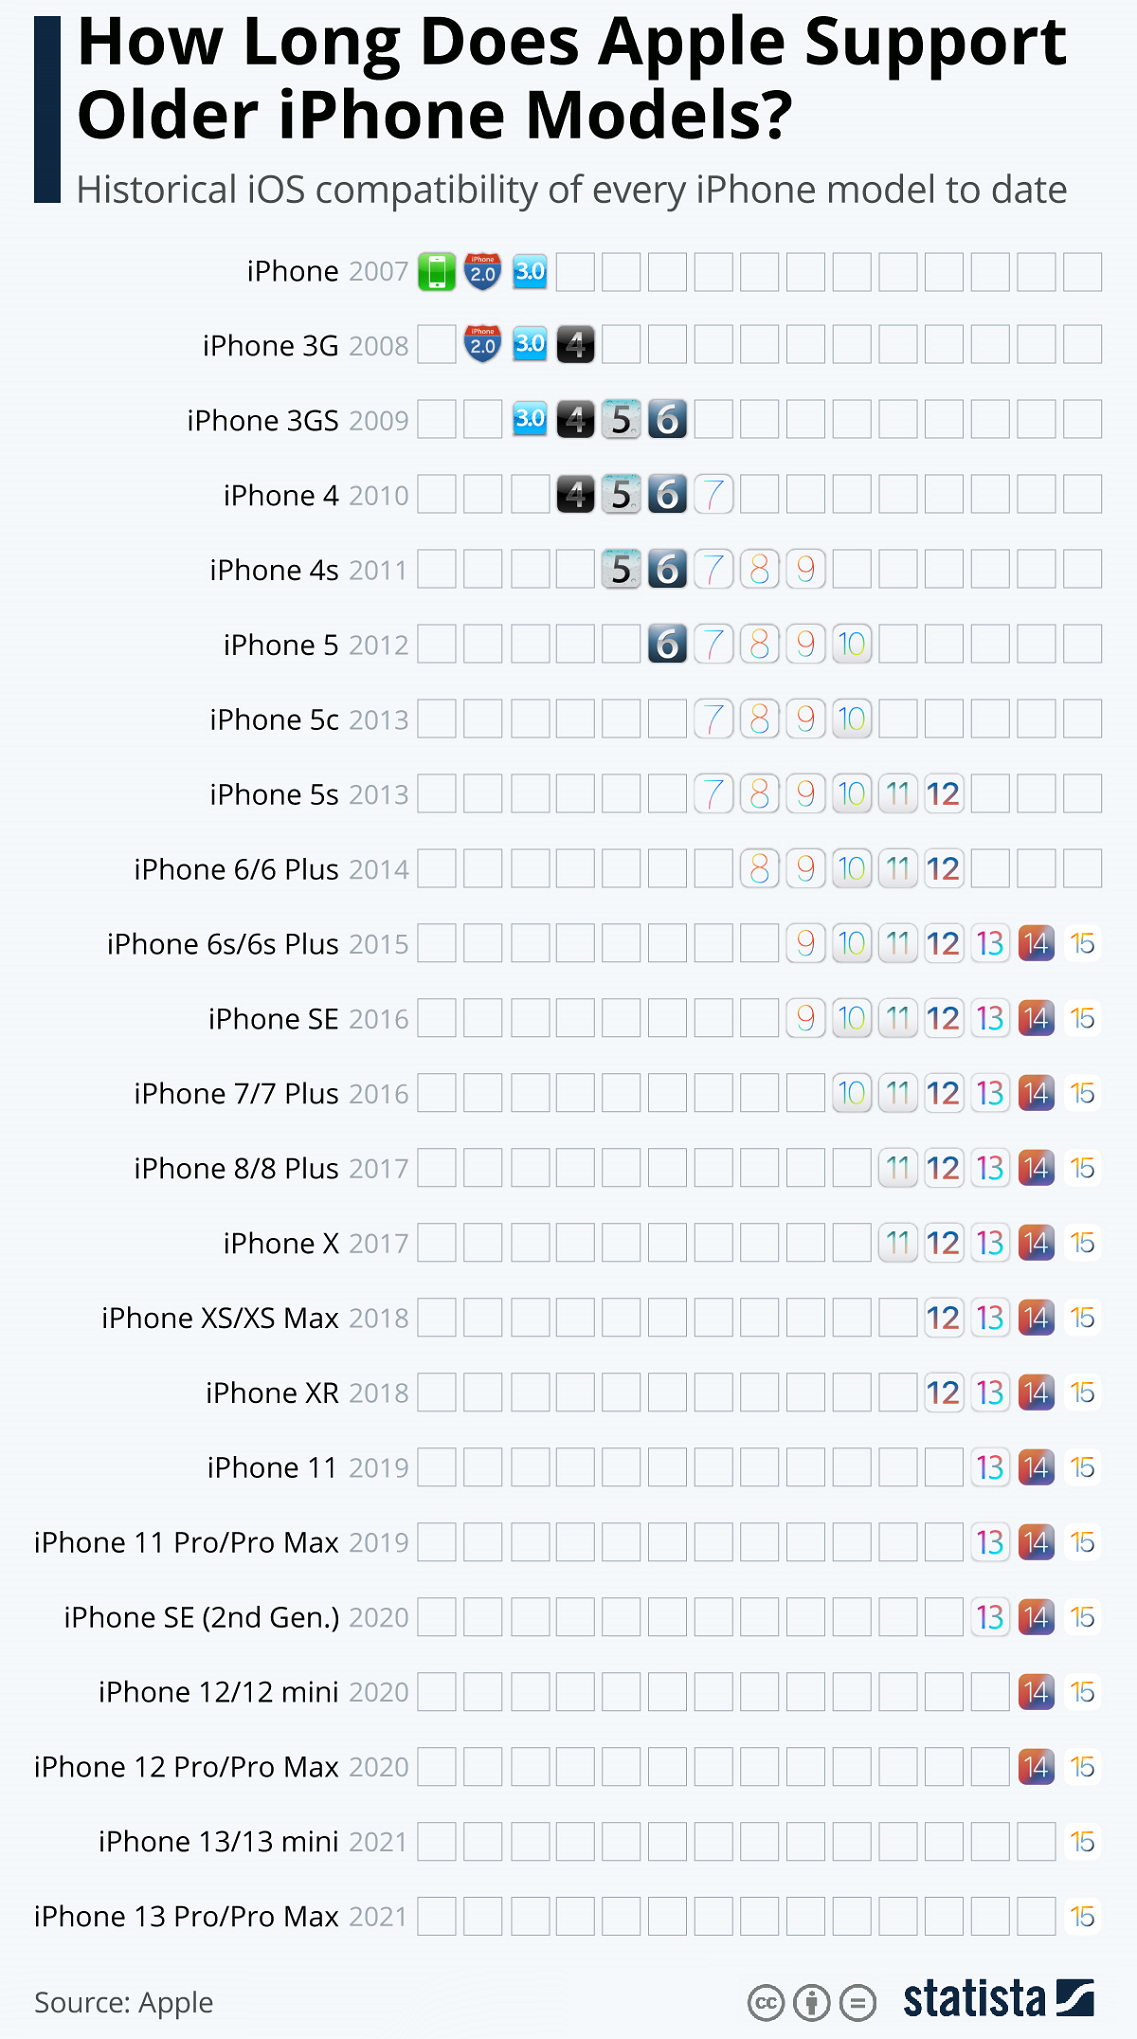 ios-iphone-compatibility-2007-2021.png